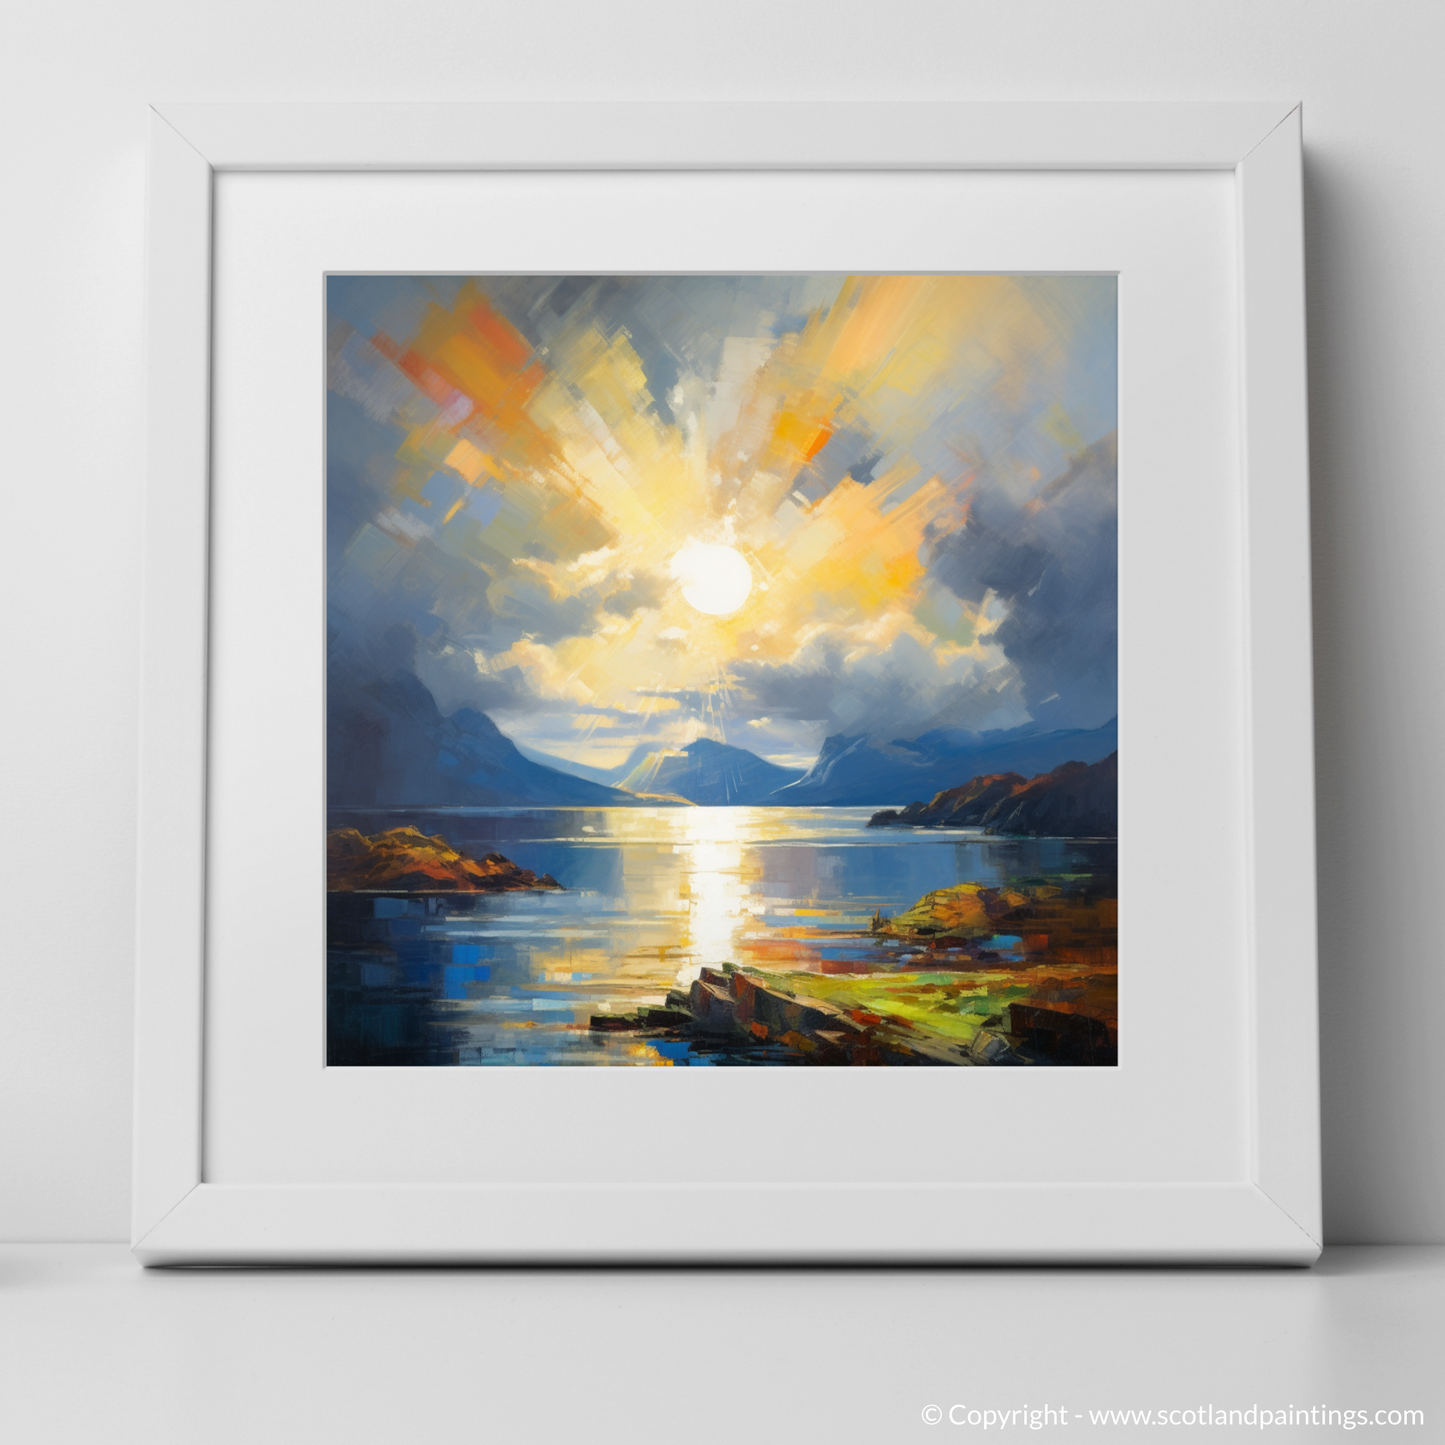 Art Print of Sun rays through clouds above Loch Lomond with a white frame